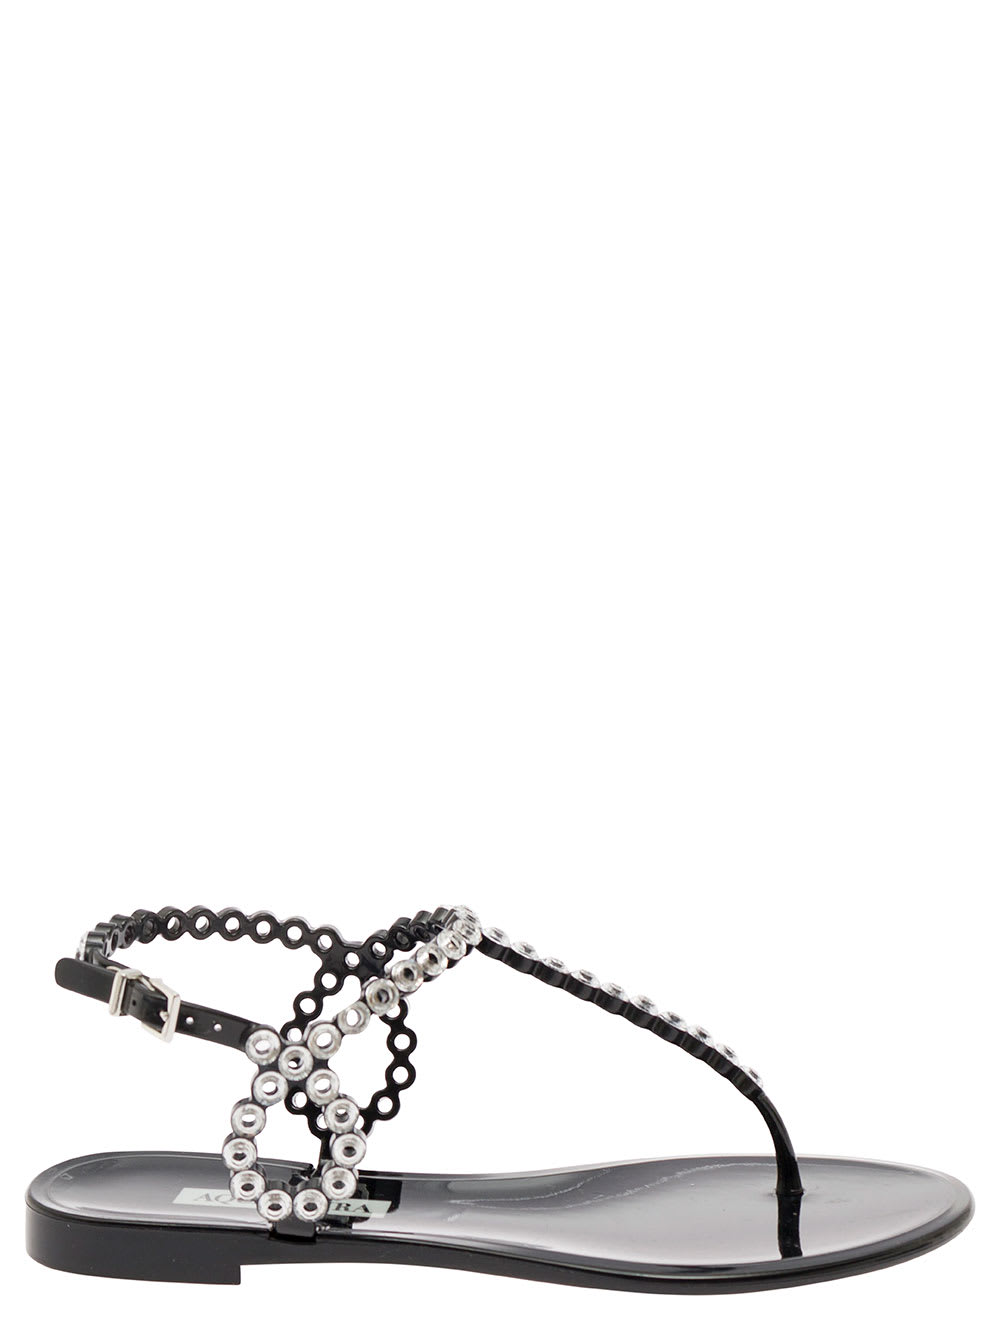 Almost Bare Black Sandal With Crystals